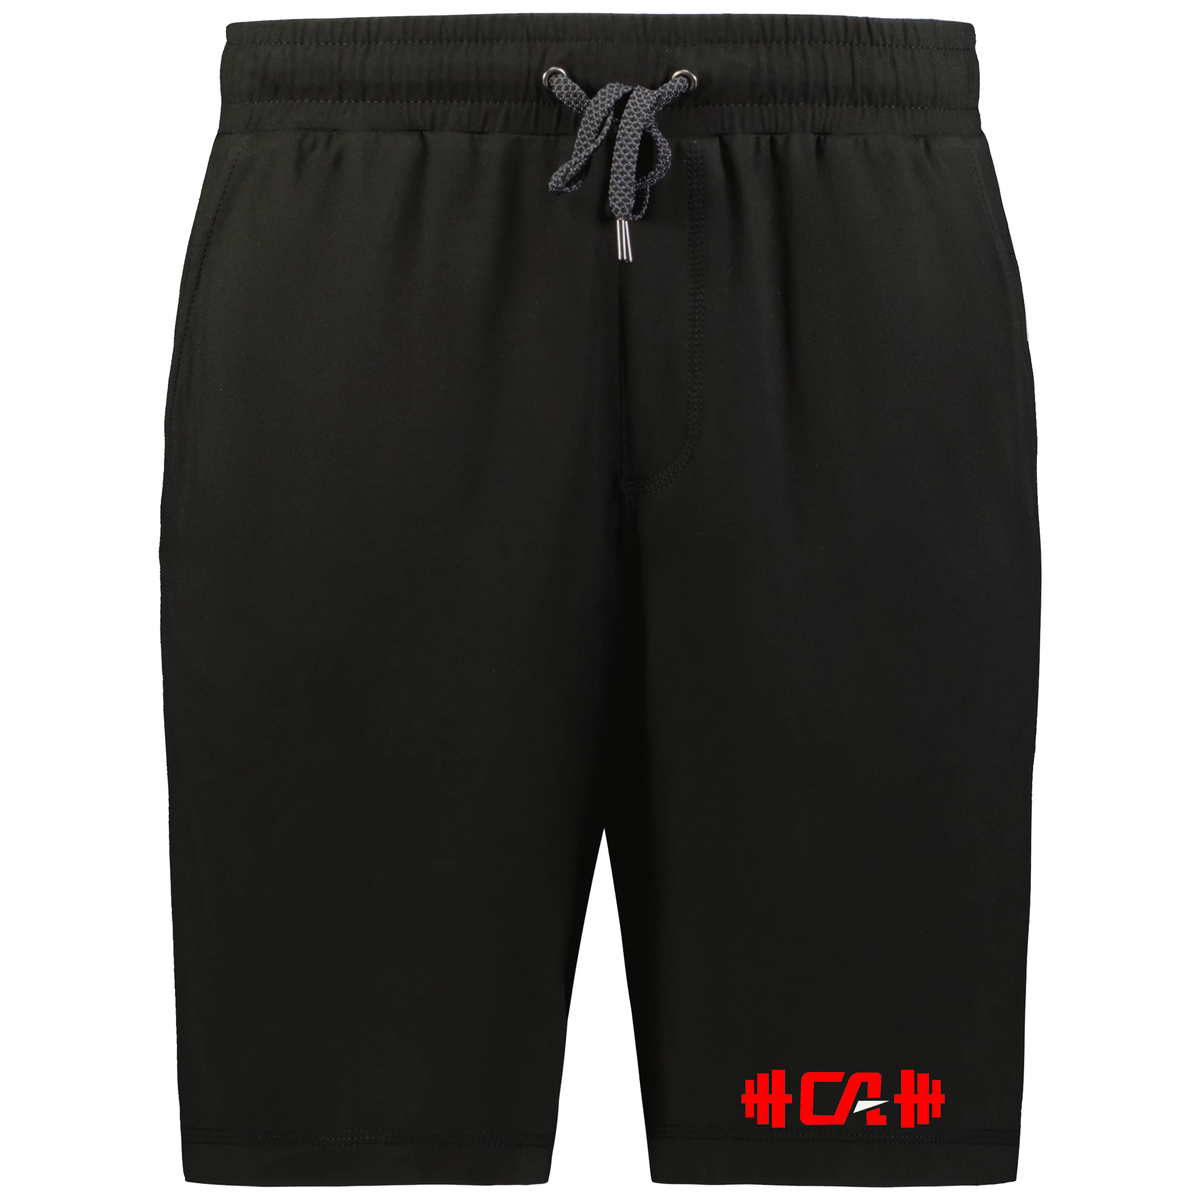 Clubhouse Performance Ventura Soft Knit Shorts